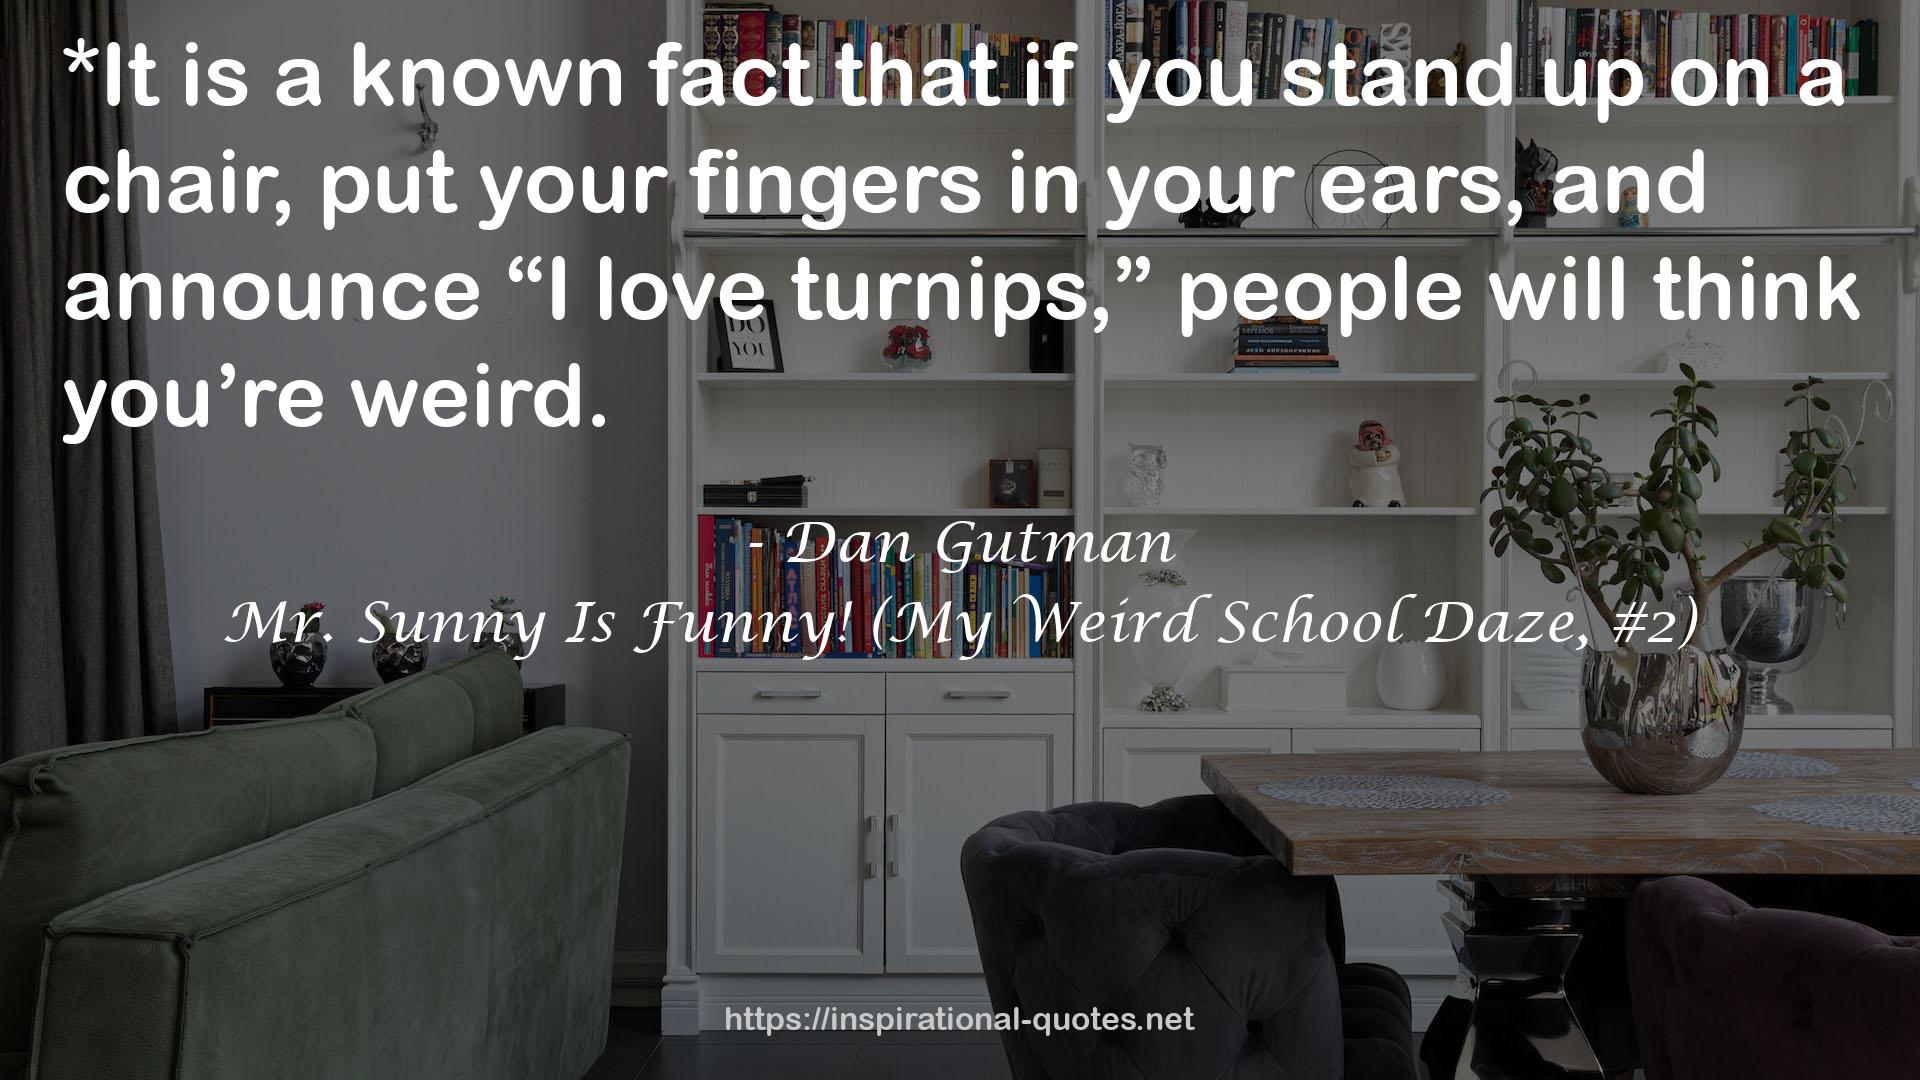 Mr. Sunny Is Funny! (My Weird School Daze, #2) QUOTES